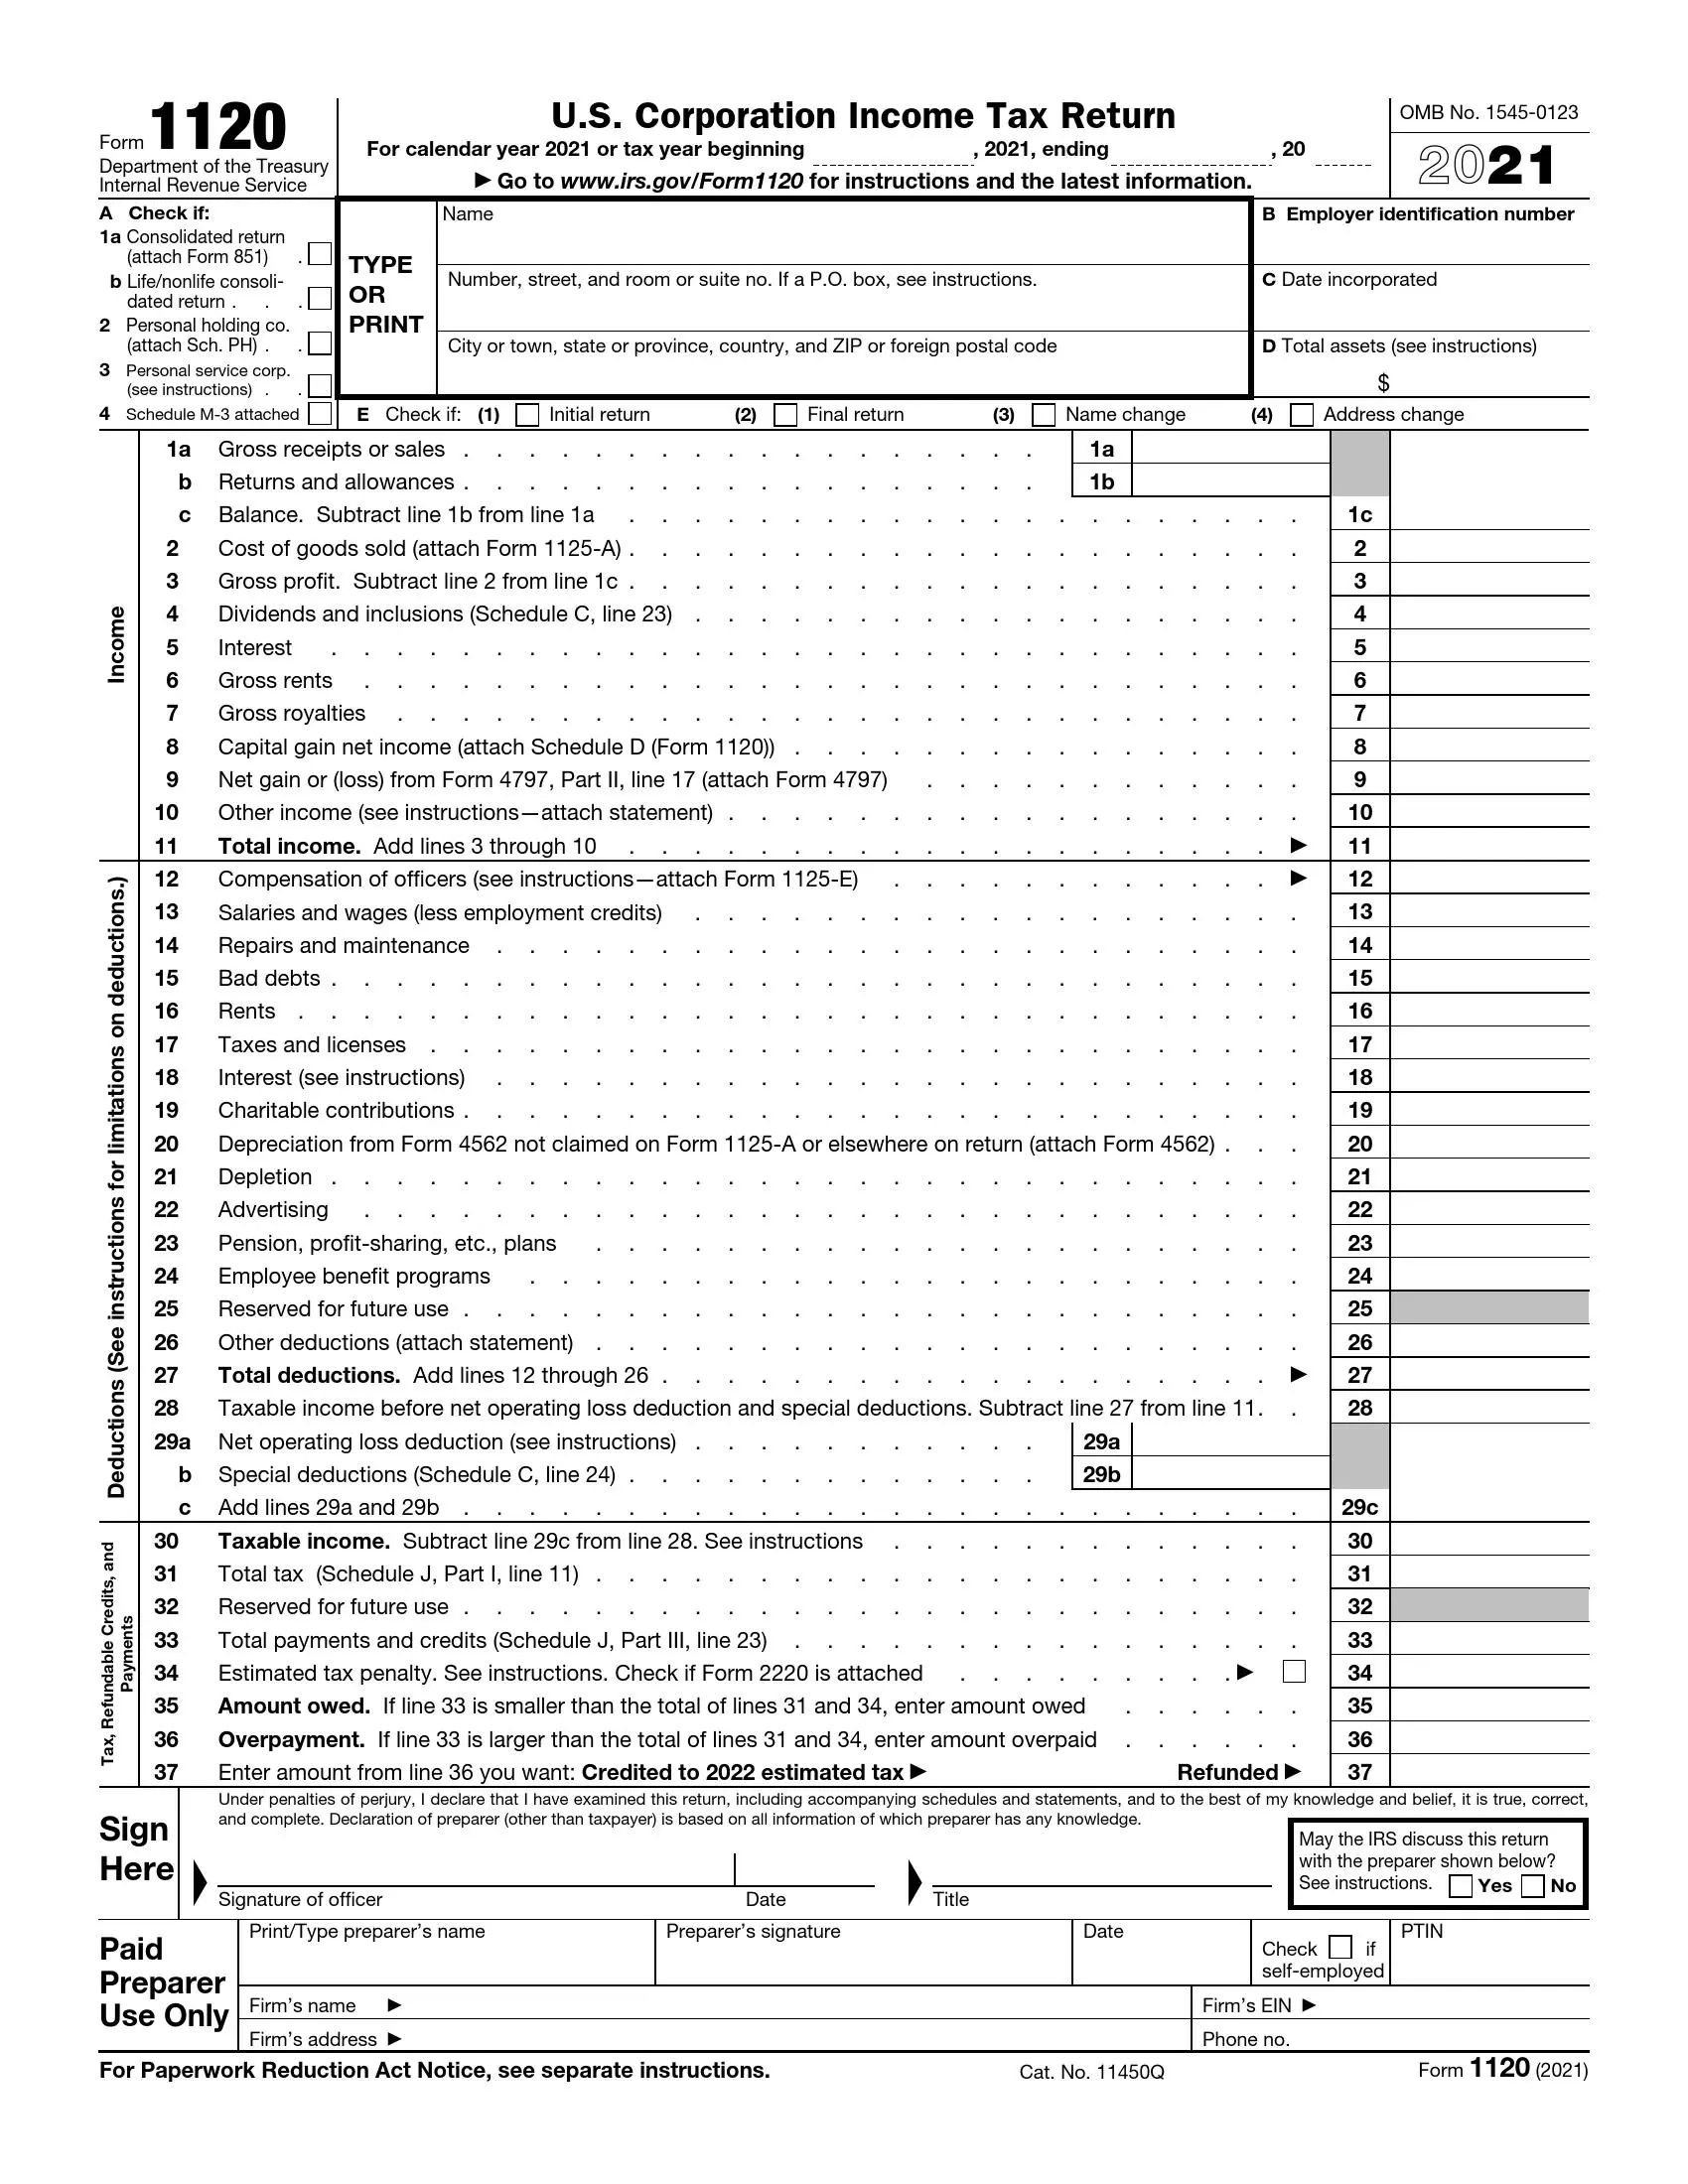 irs form 1120 2021 preview